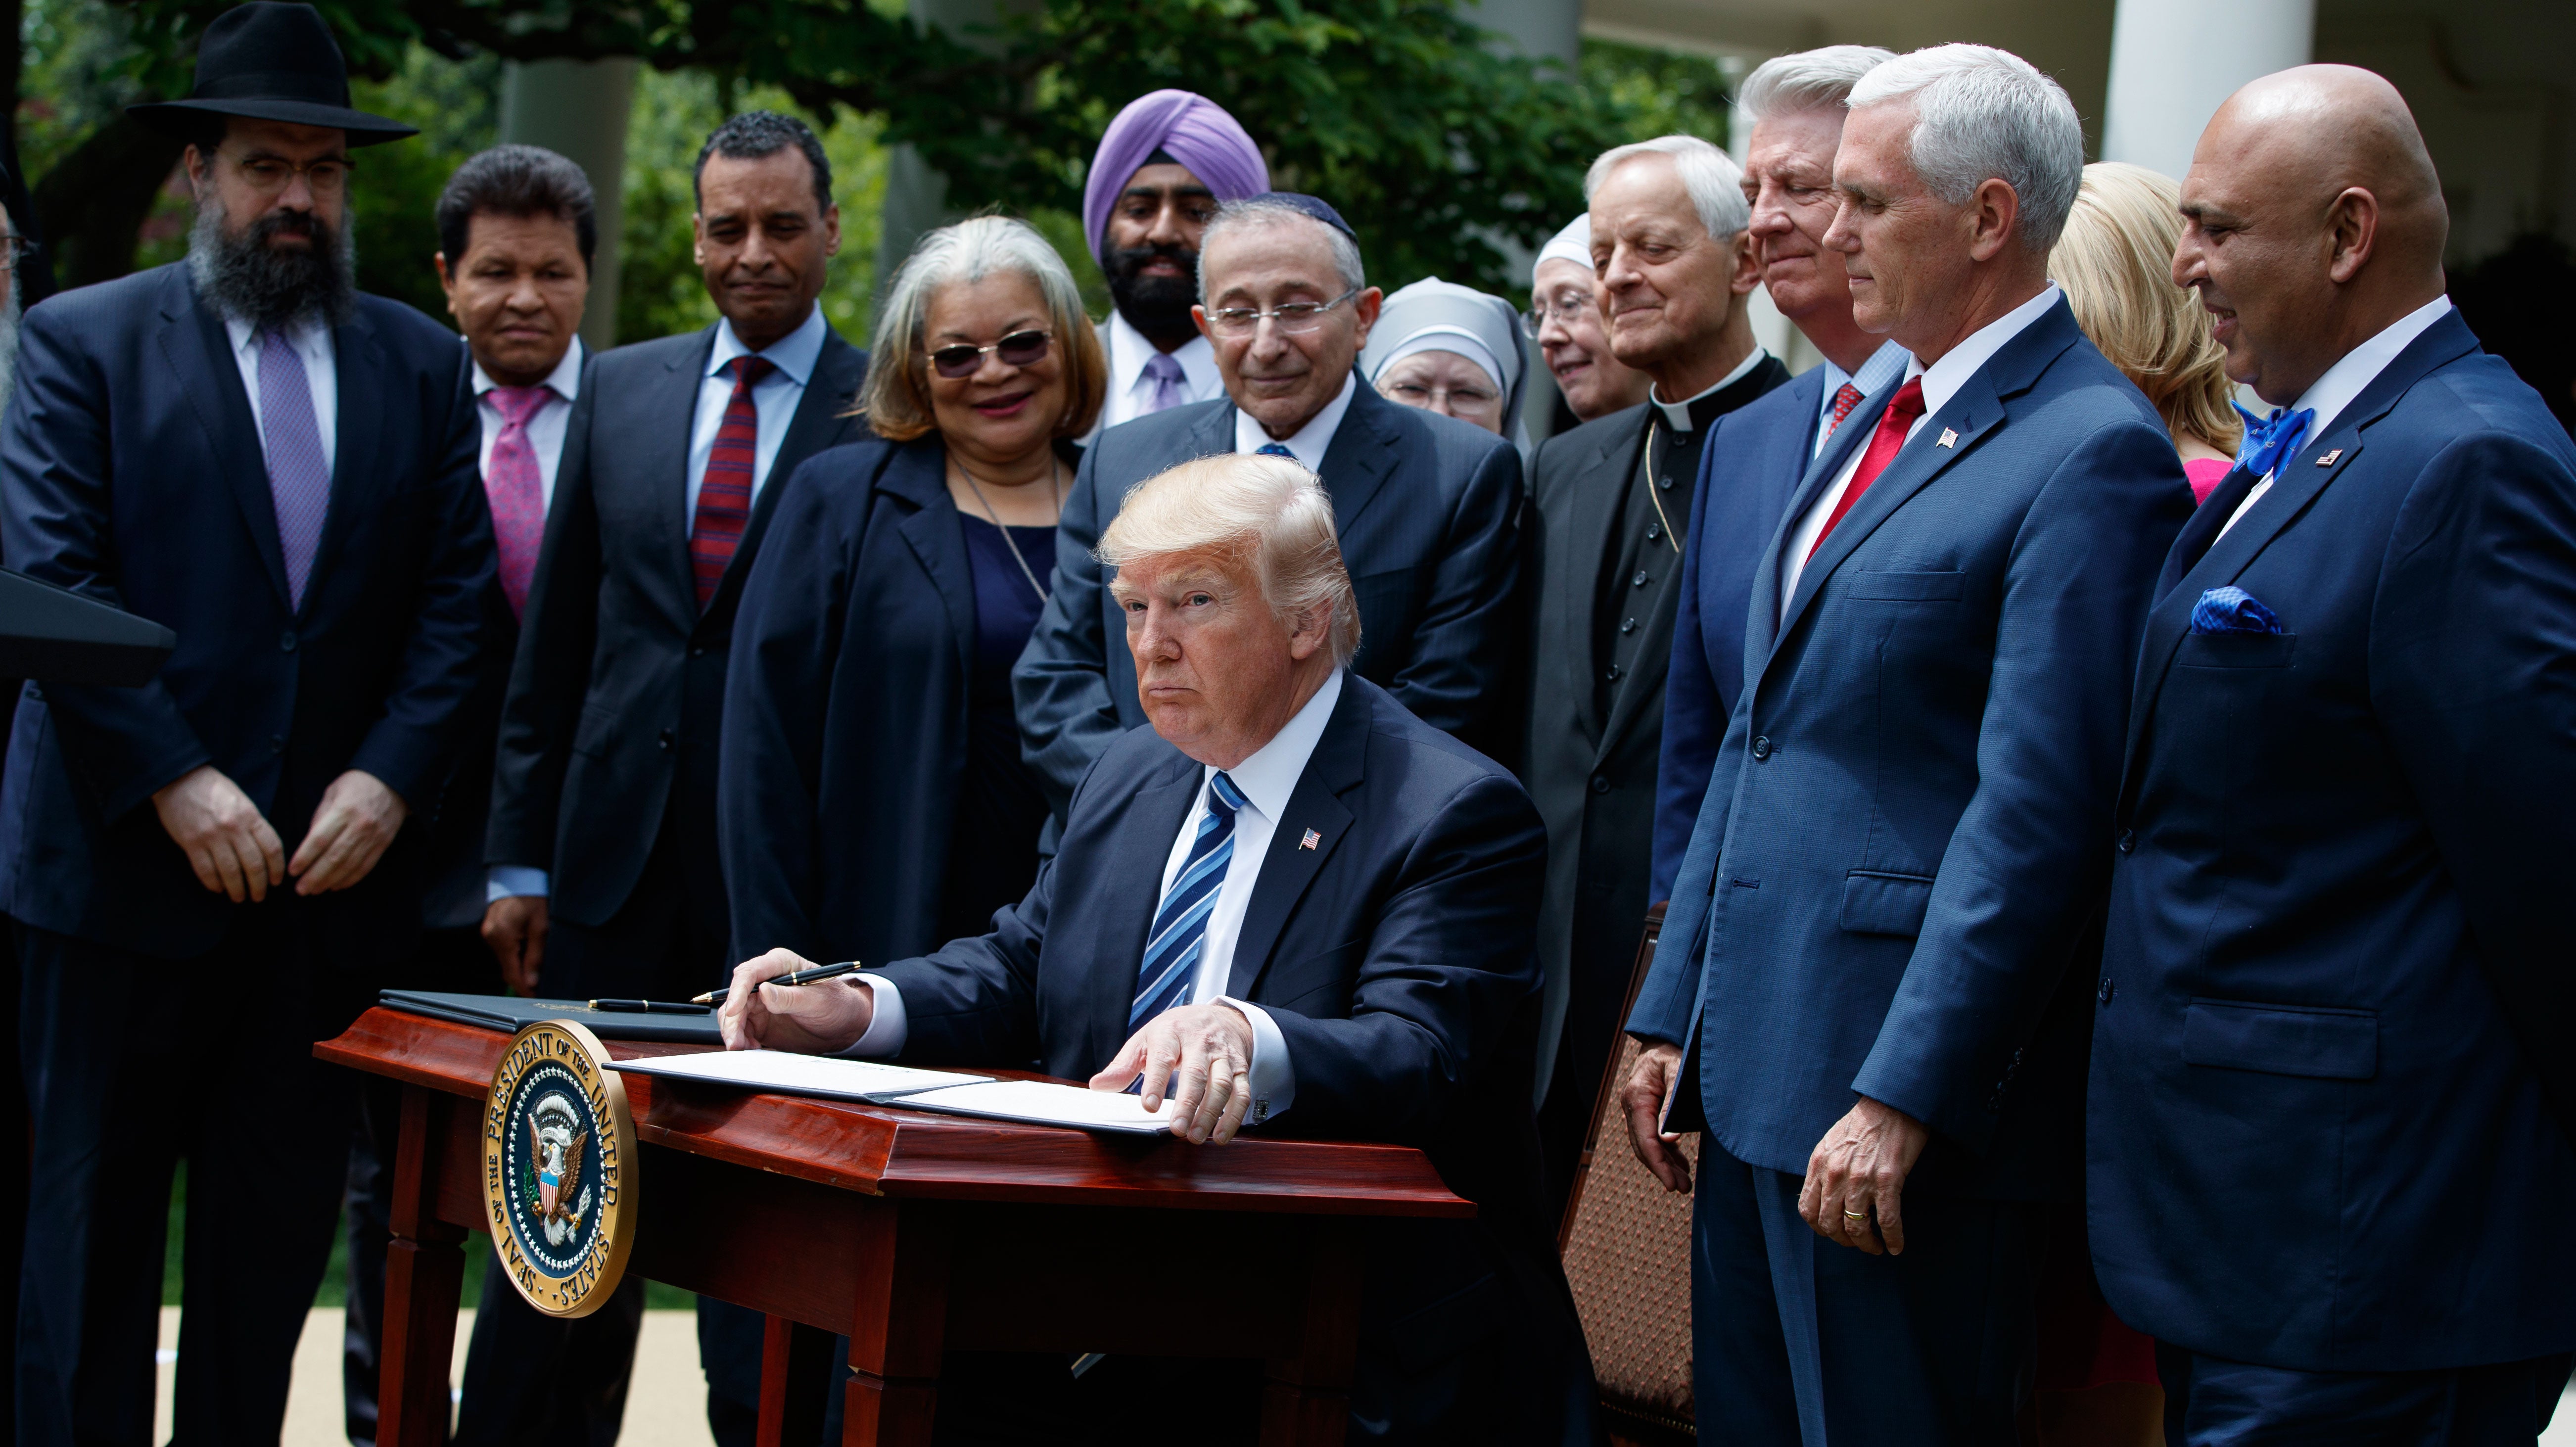  President Donald Trump signs an executive order aimed at easing an IRS rule limiting political activity for churches, Thursday, May 4, 2017, in the Rose Garden of the White House in Washington. (Evan Vucci/AP Photo) 